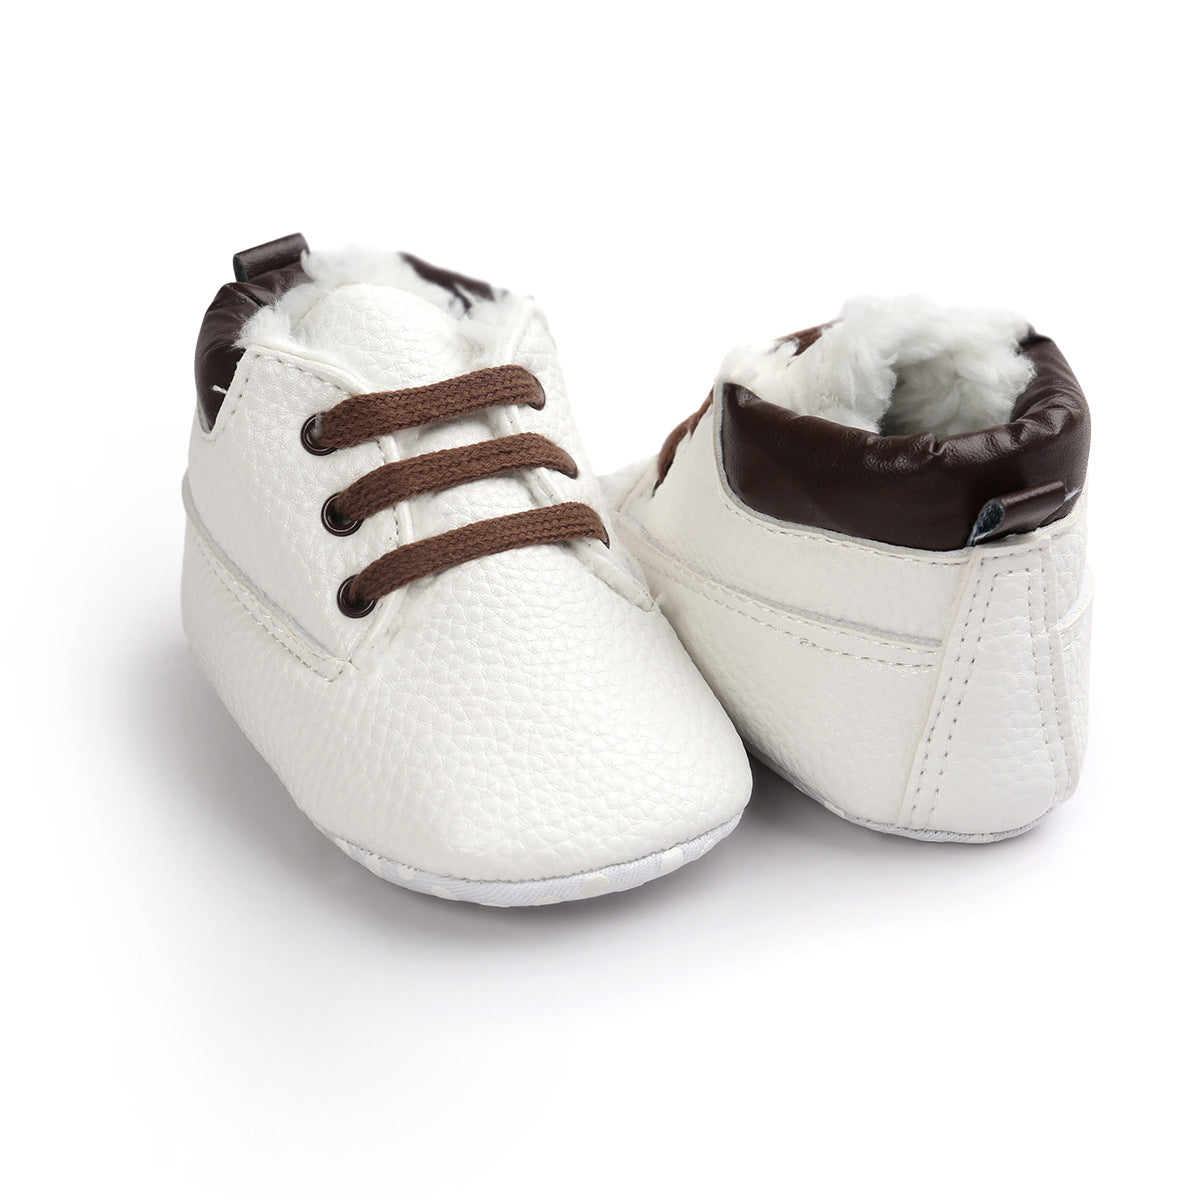 Winter Baby Boys Shoes Suede Leather Sneaker Toddler Baby Shoes Anti-Slip Soft Soled Lace up Snow Boots Warm Baby Boot